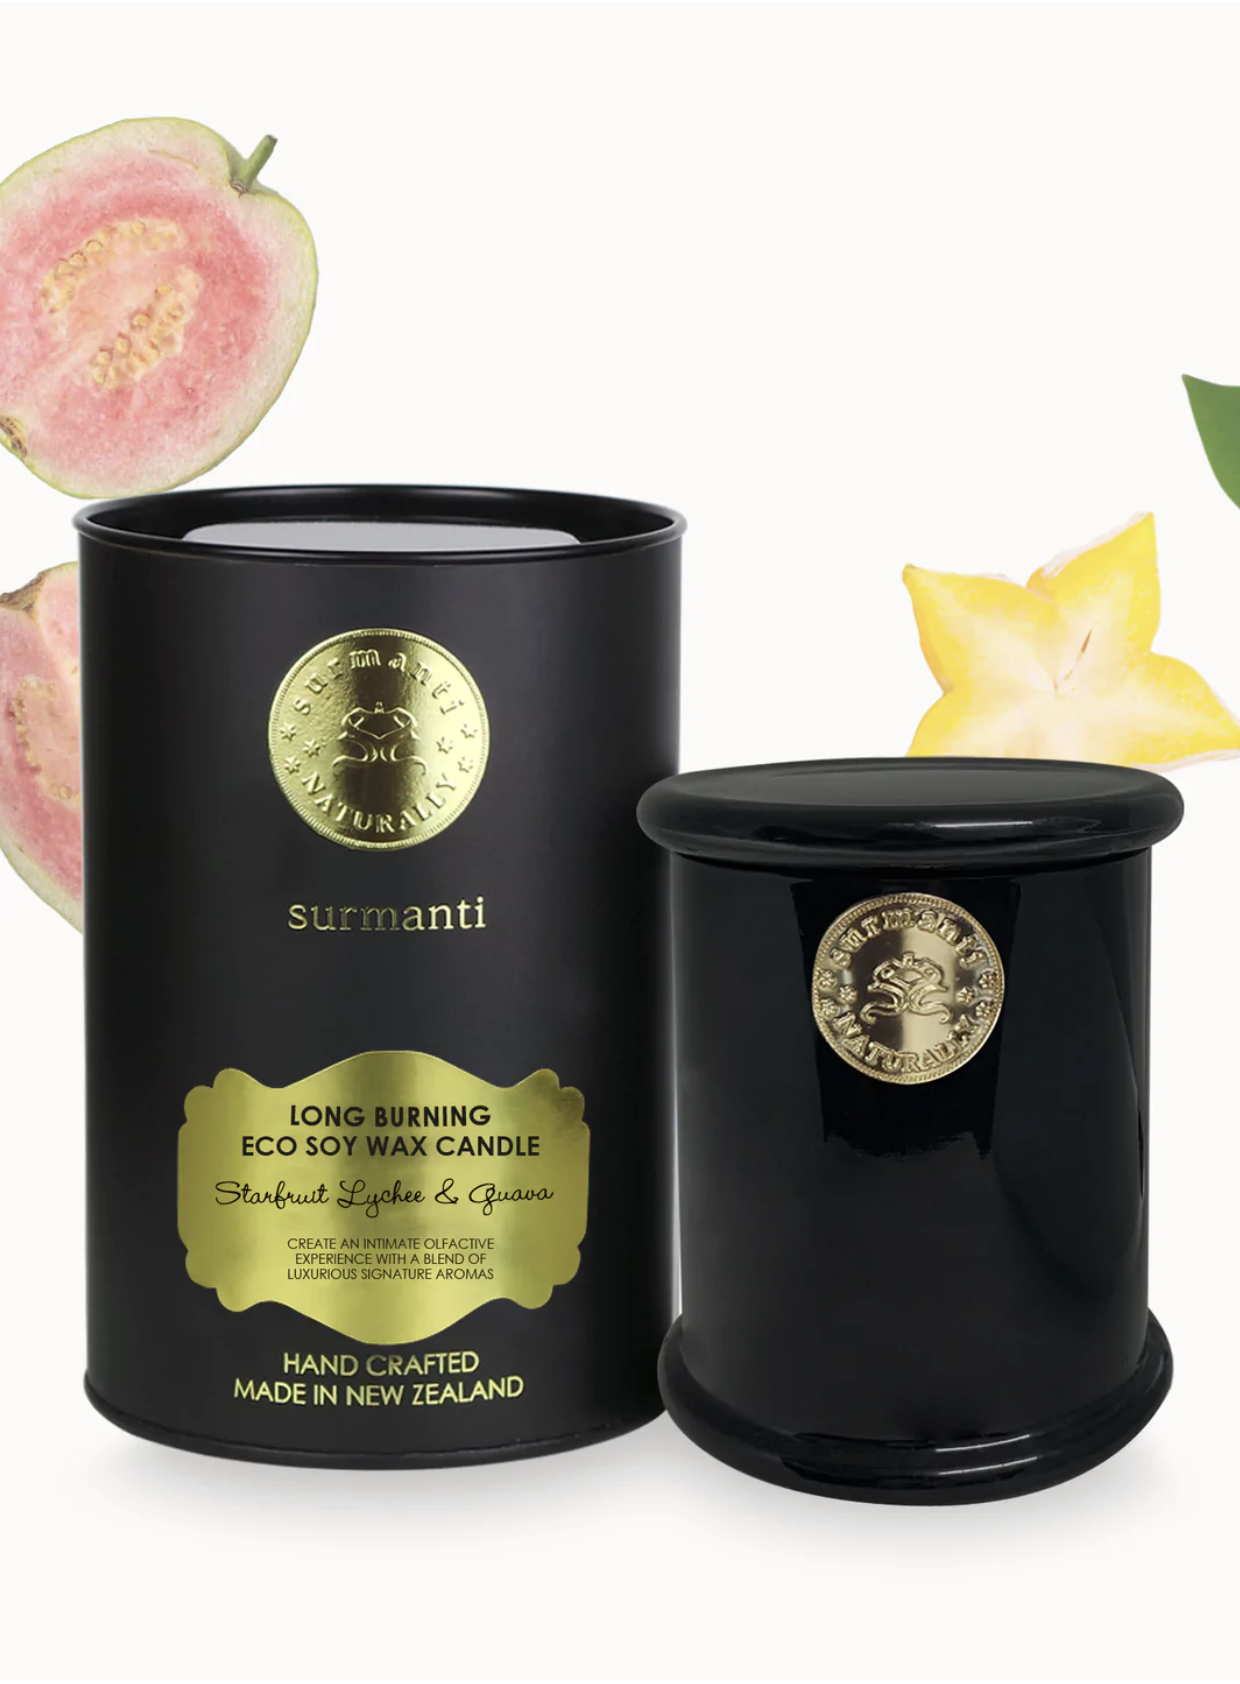 Starfruit Lychee and Guava Long Burning Eco Soy Wax Candle